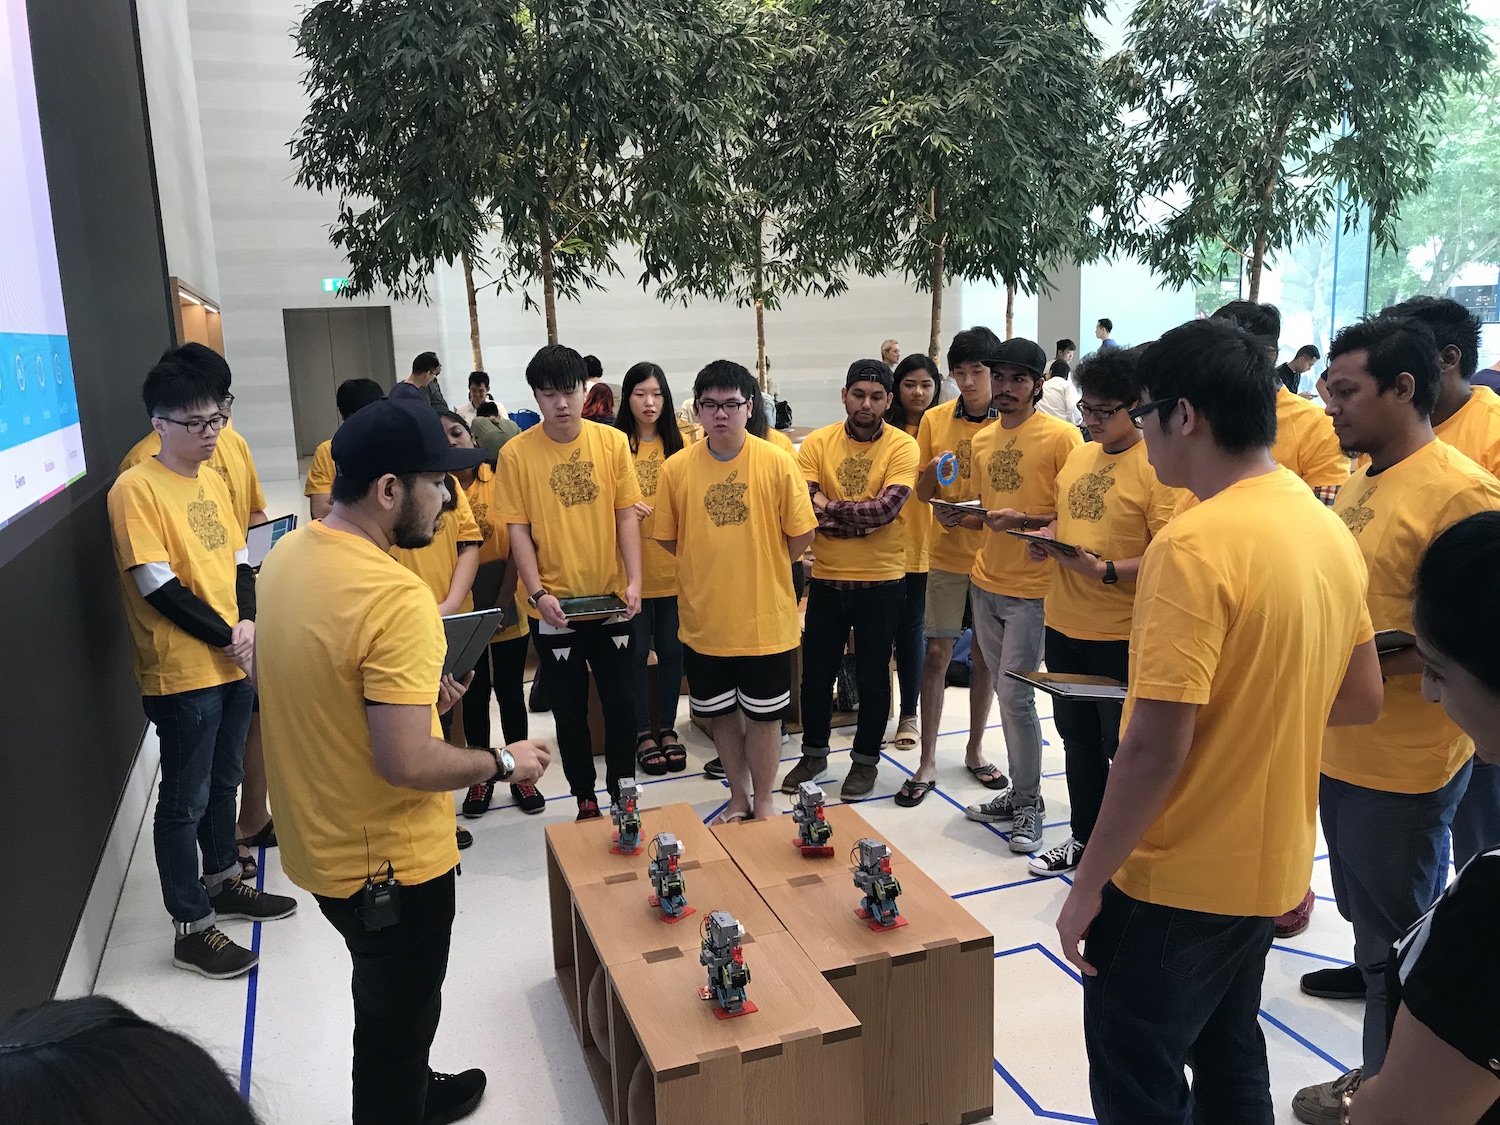 MDIS students listening to an instructor explaining about robotics.